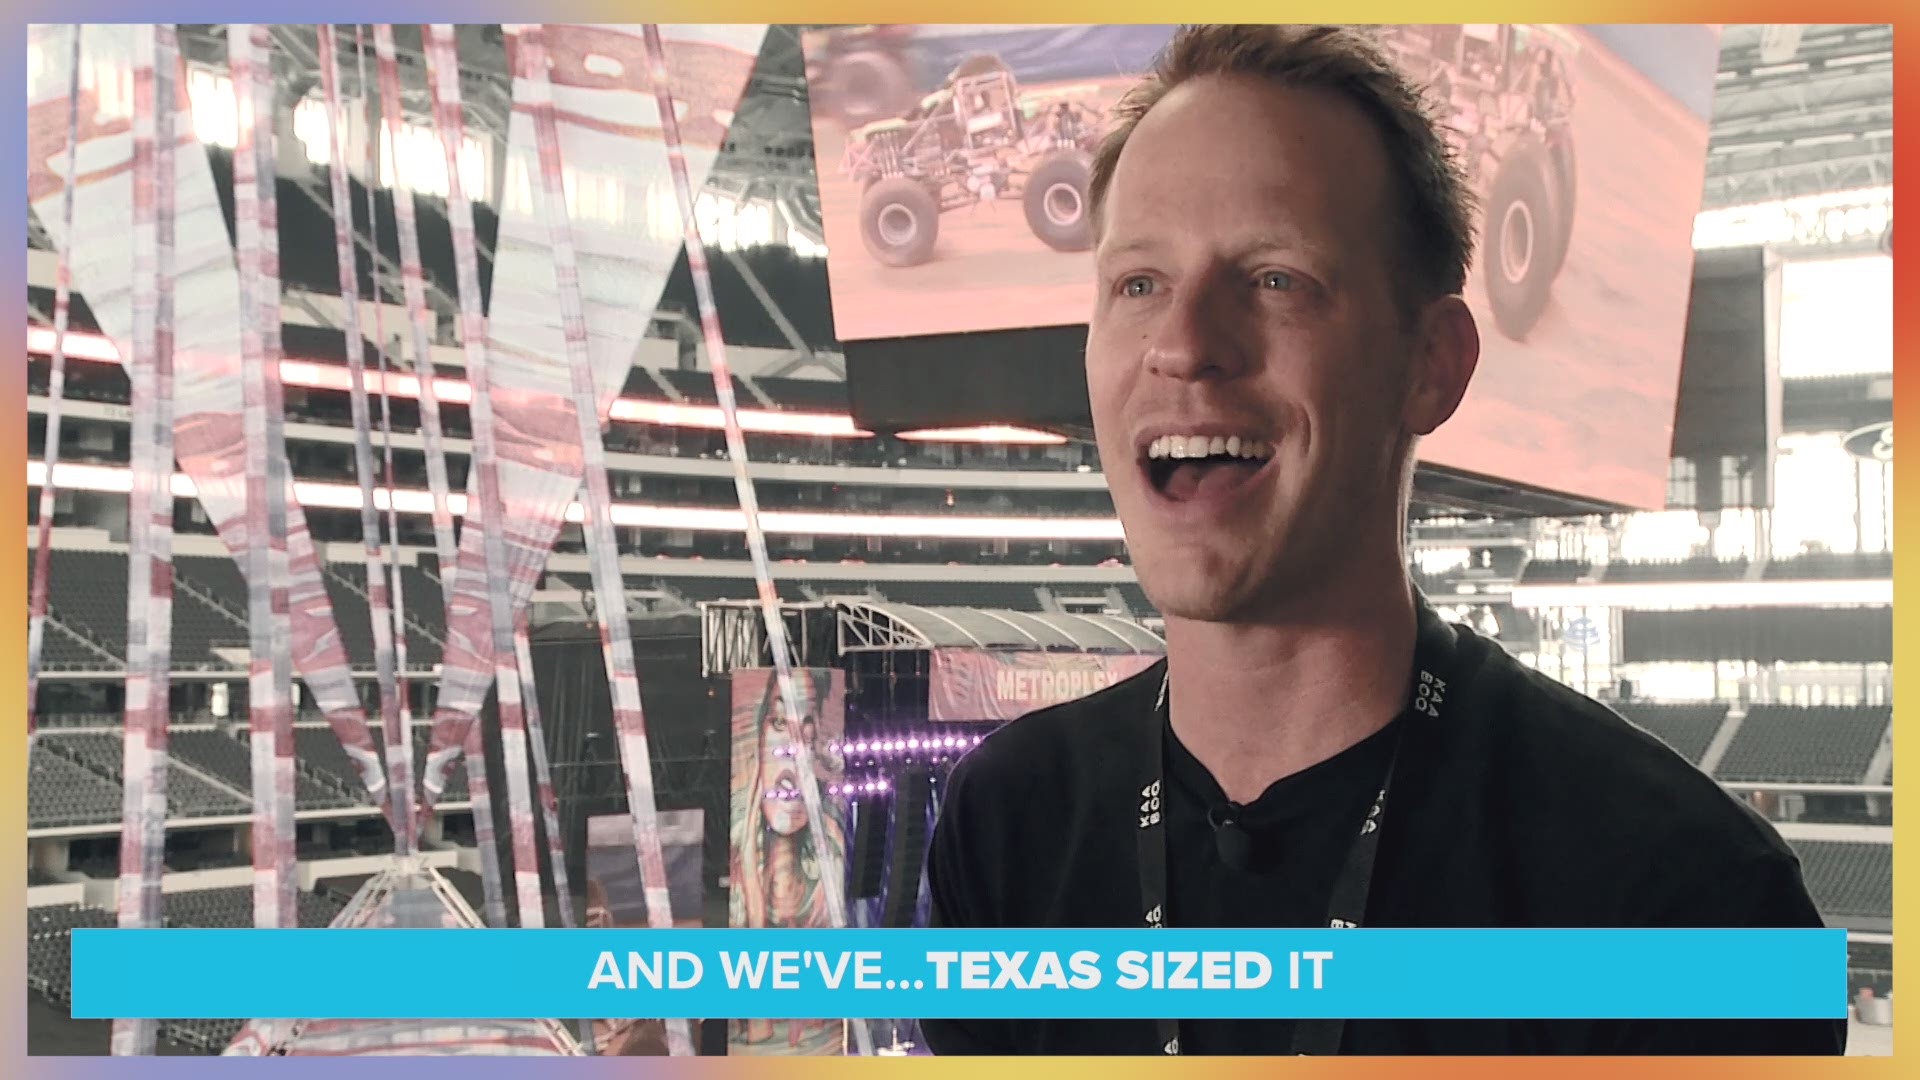 Listen to headlining artists, laugh at A-list comedians and nosh on gourmet food at the inaugural launch of the eclectic Kaaboo Texas experience.